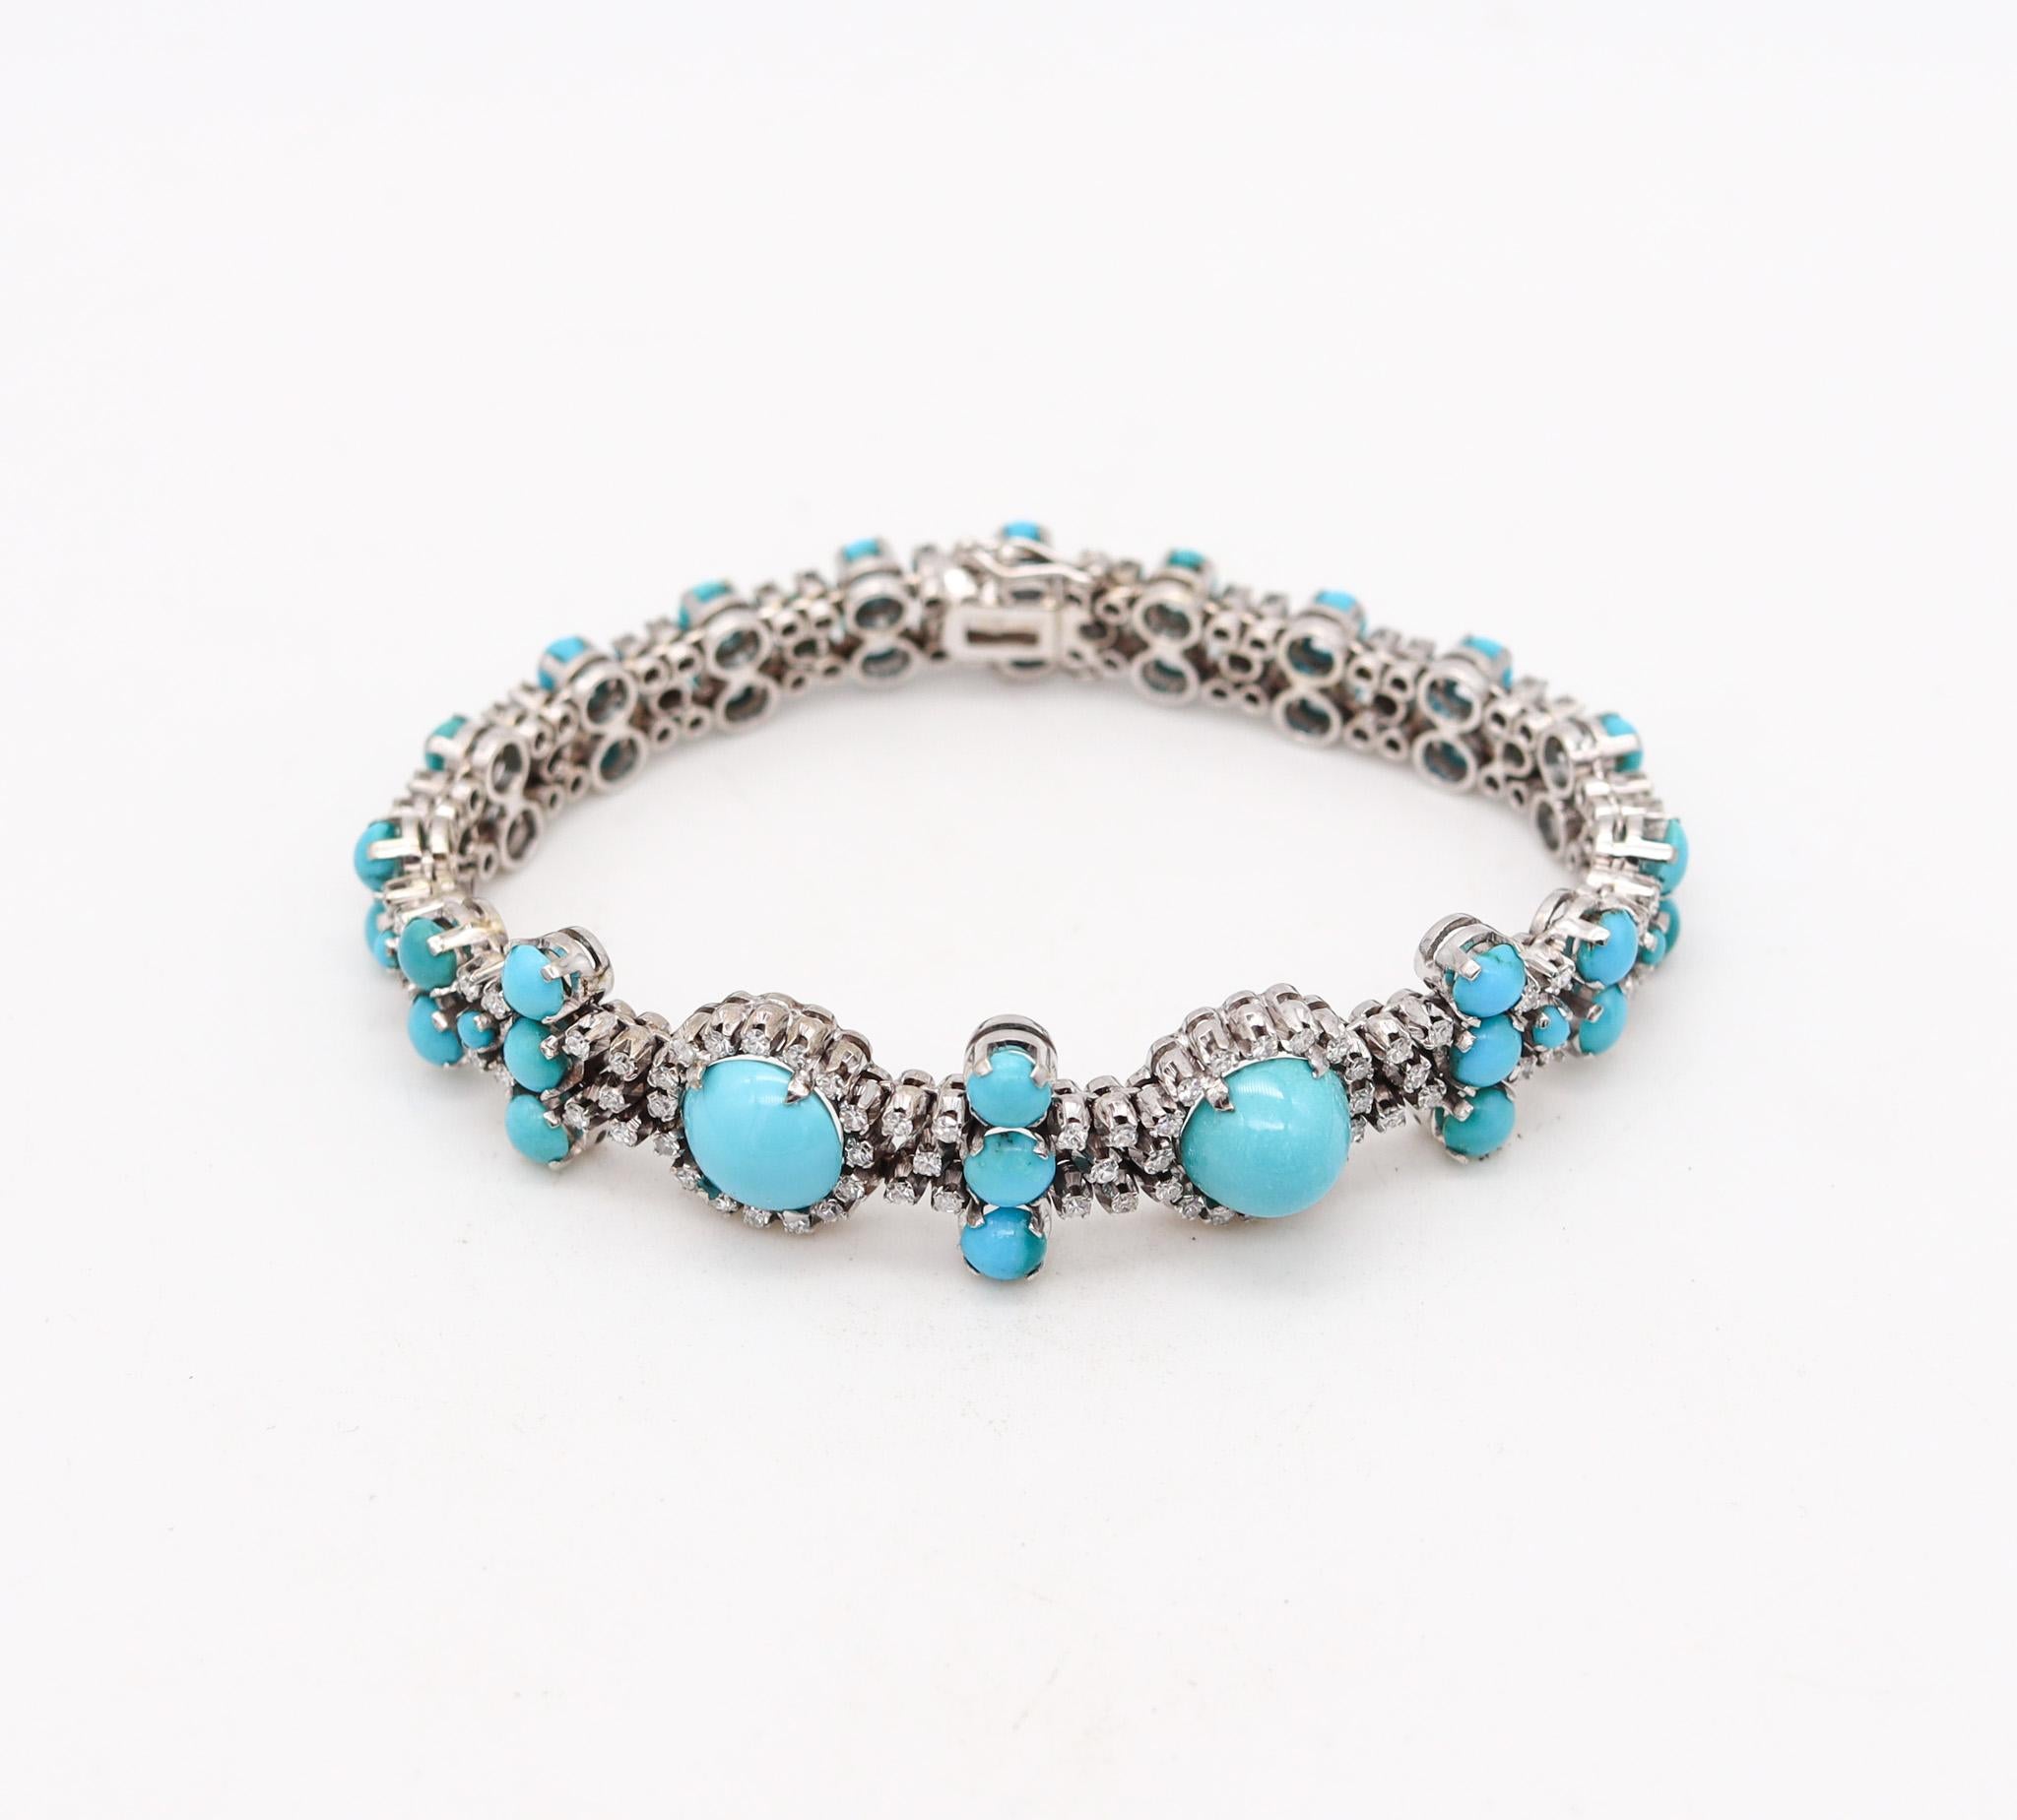 Modernist Italian 1950 Bracelet In 18Kt White Gold With 12.97 Ctw In Turquoises & Diamonds For Sale